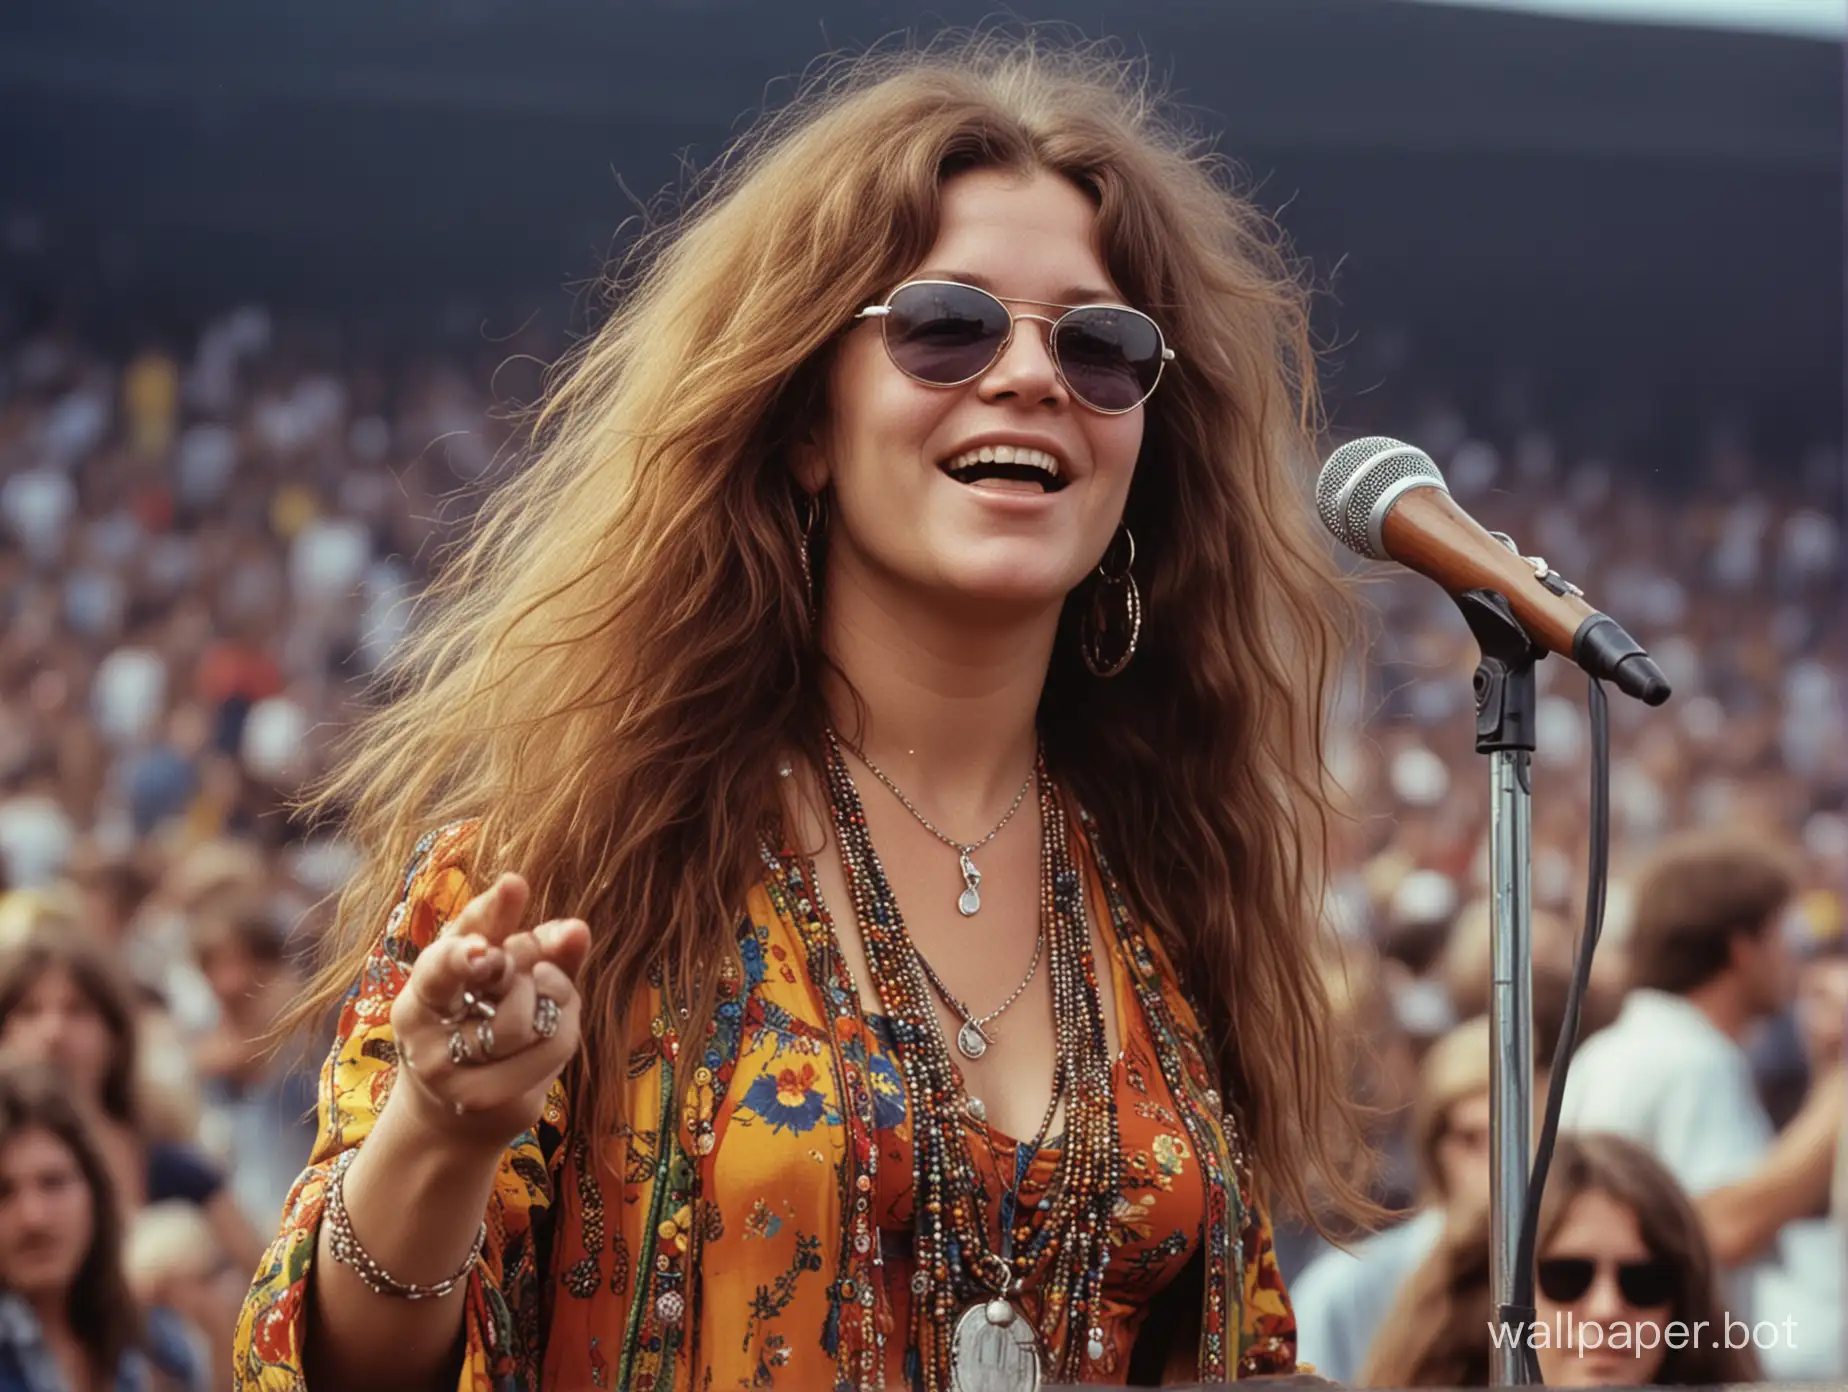 Janis Joplin on stage at the 1969 Woodstock music festival, detailed features, sharp image.